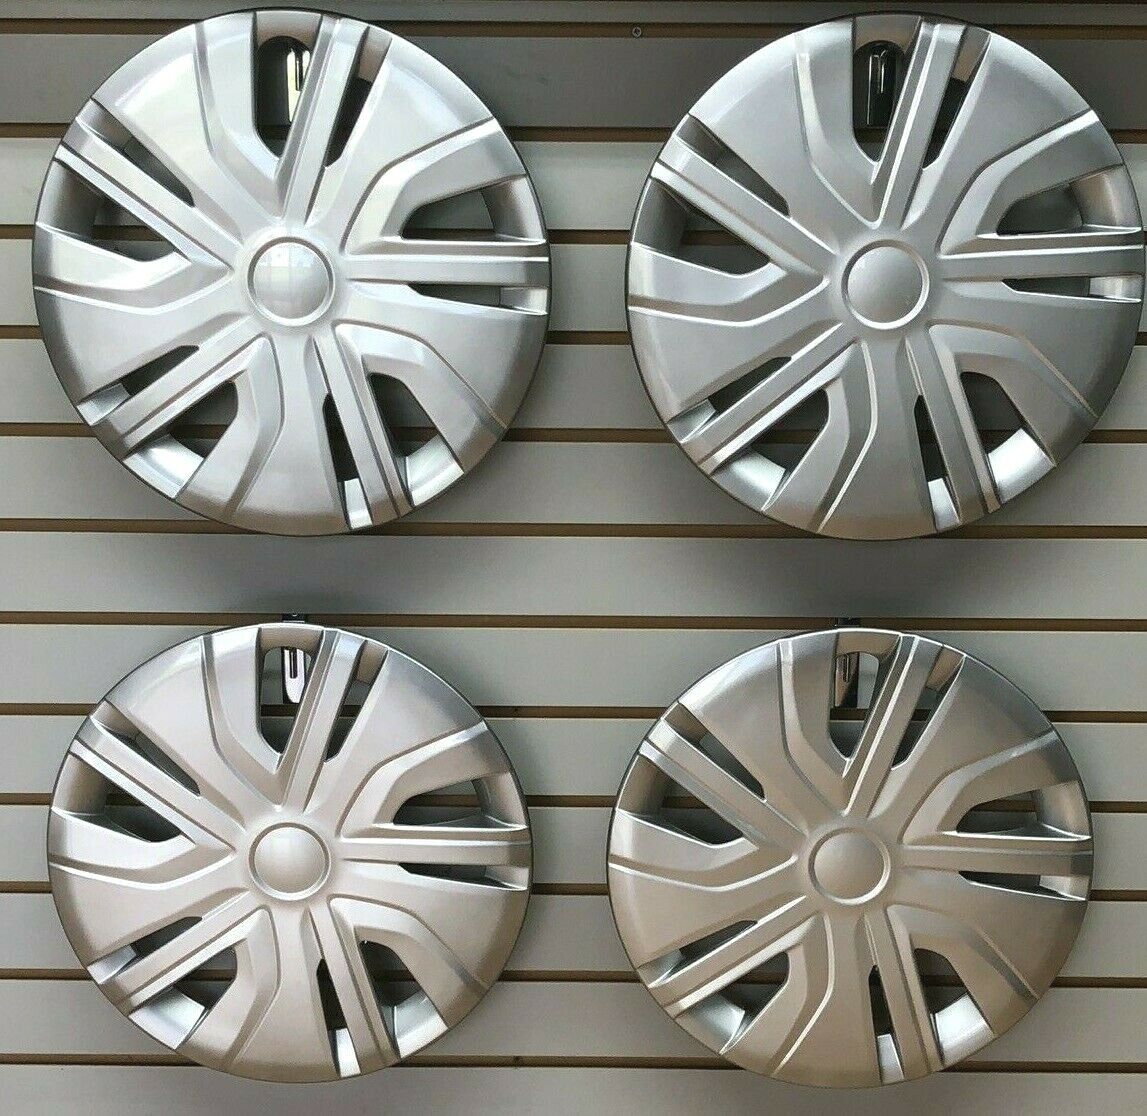 New 2017-2020 MITSUBISHI MIRAGE 14” Silver Hubcap Wheelcover SET